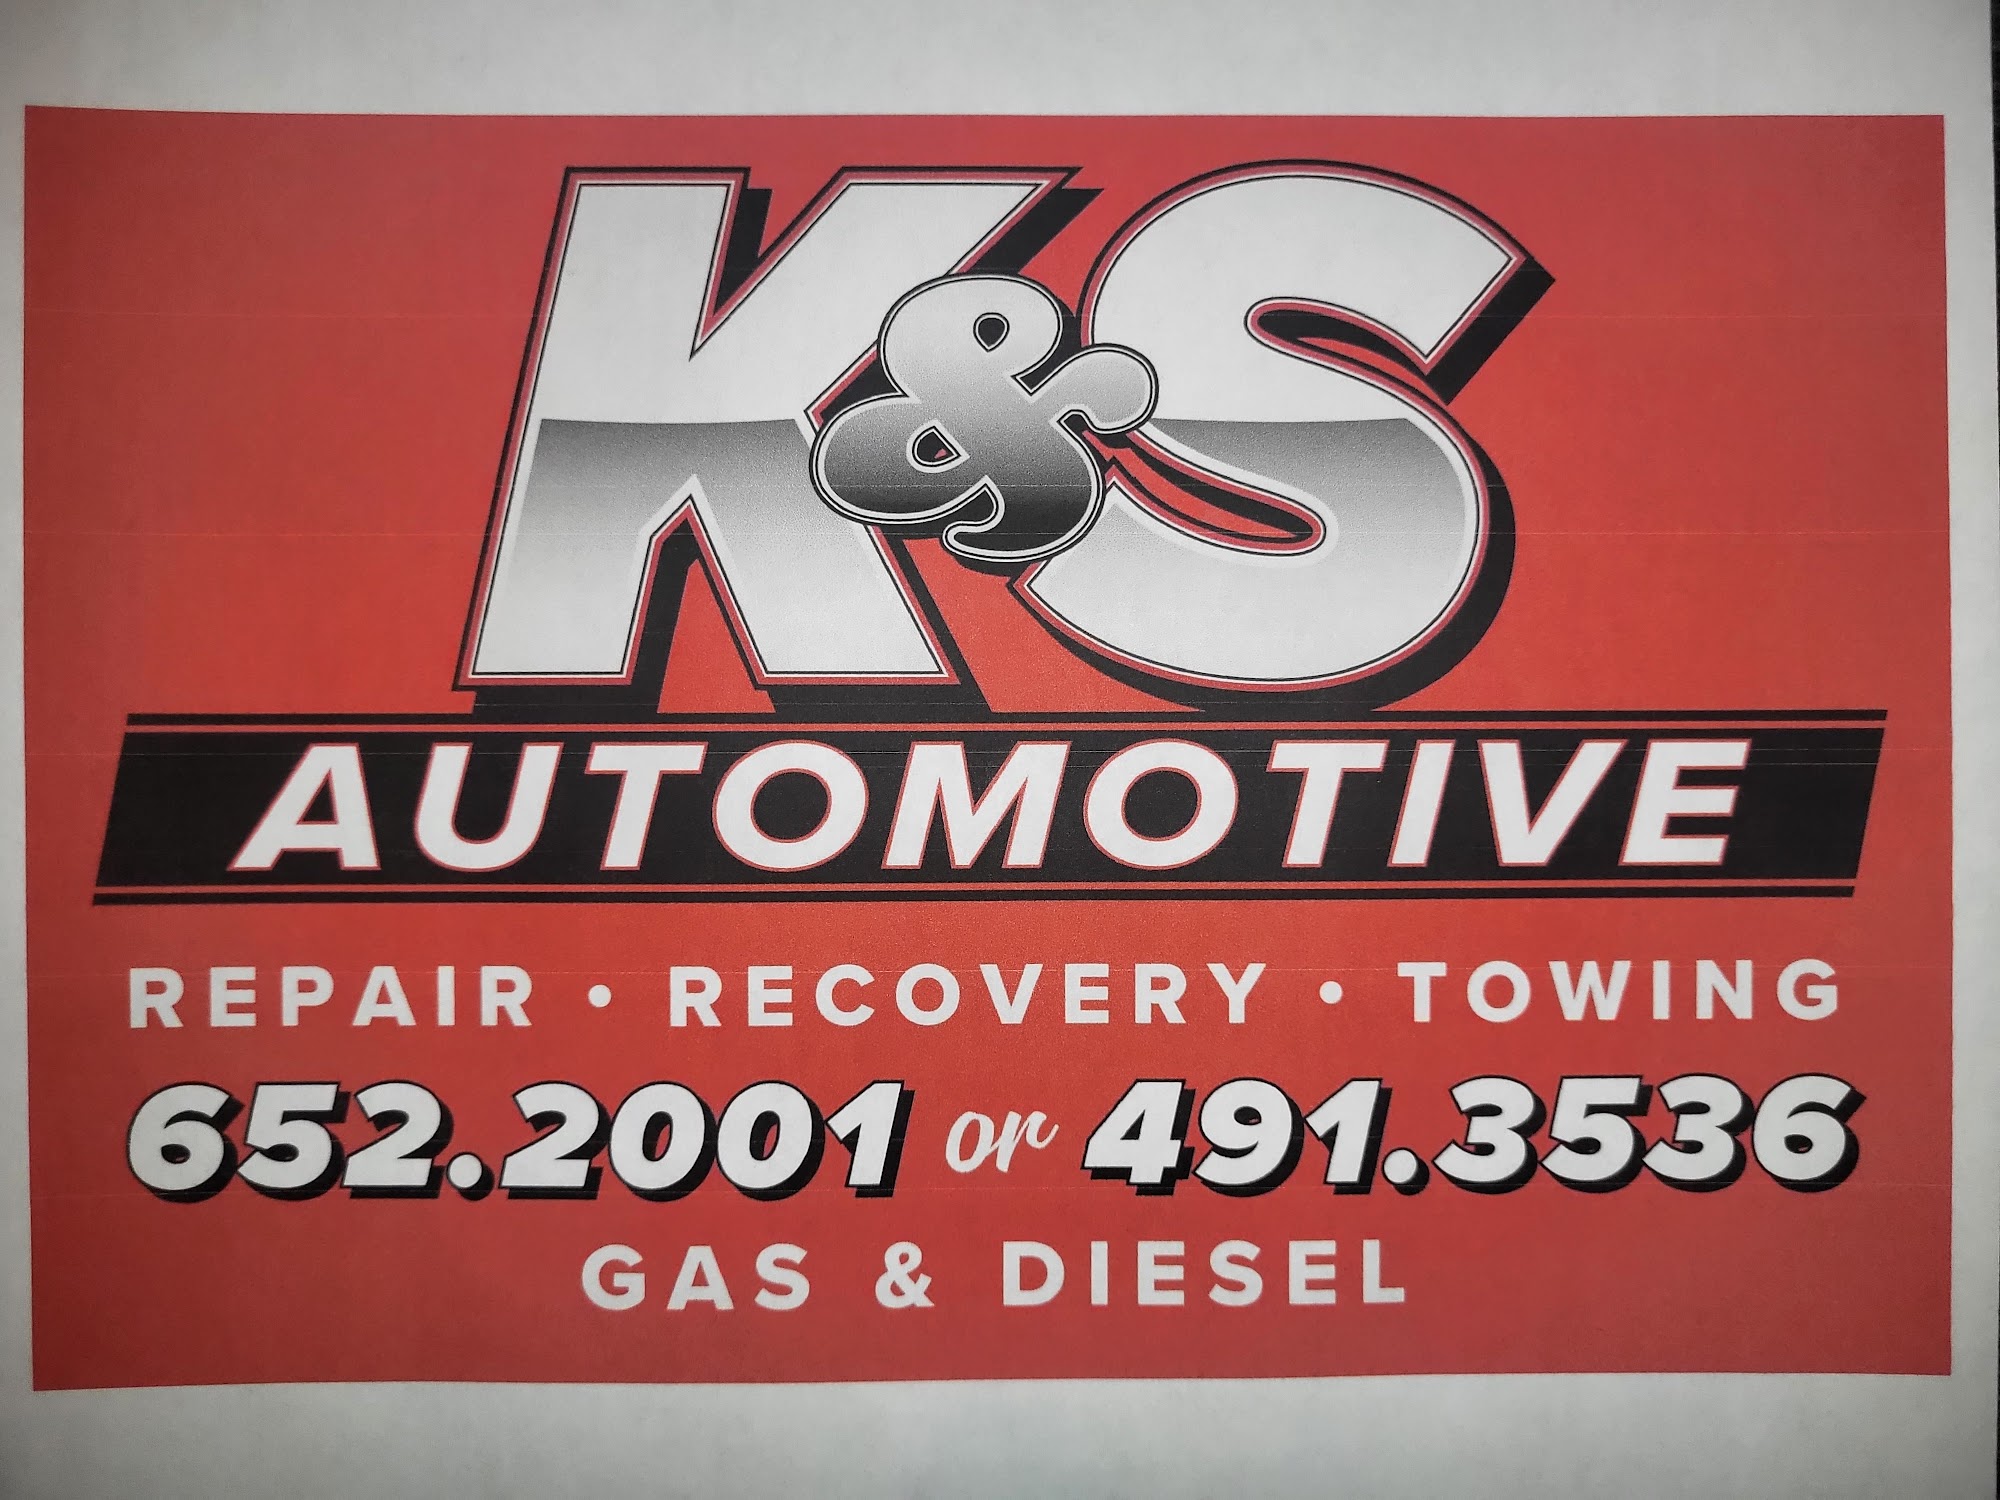 K&S Automotive Repair and Recovery